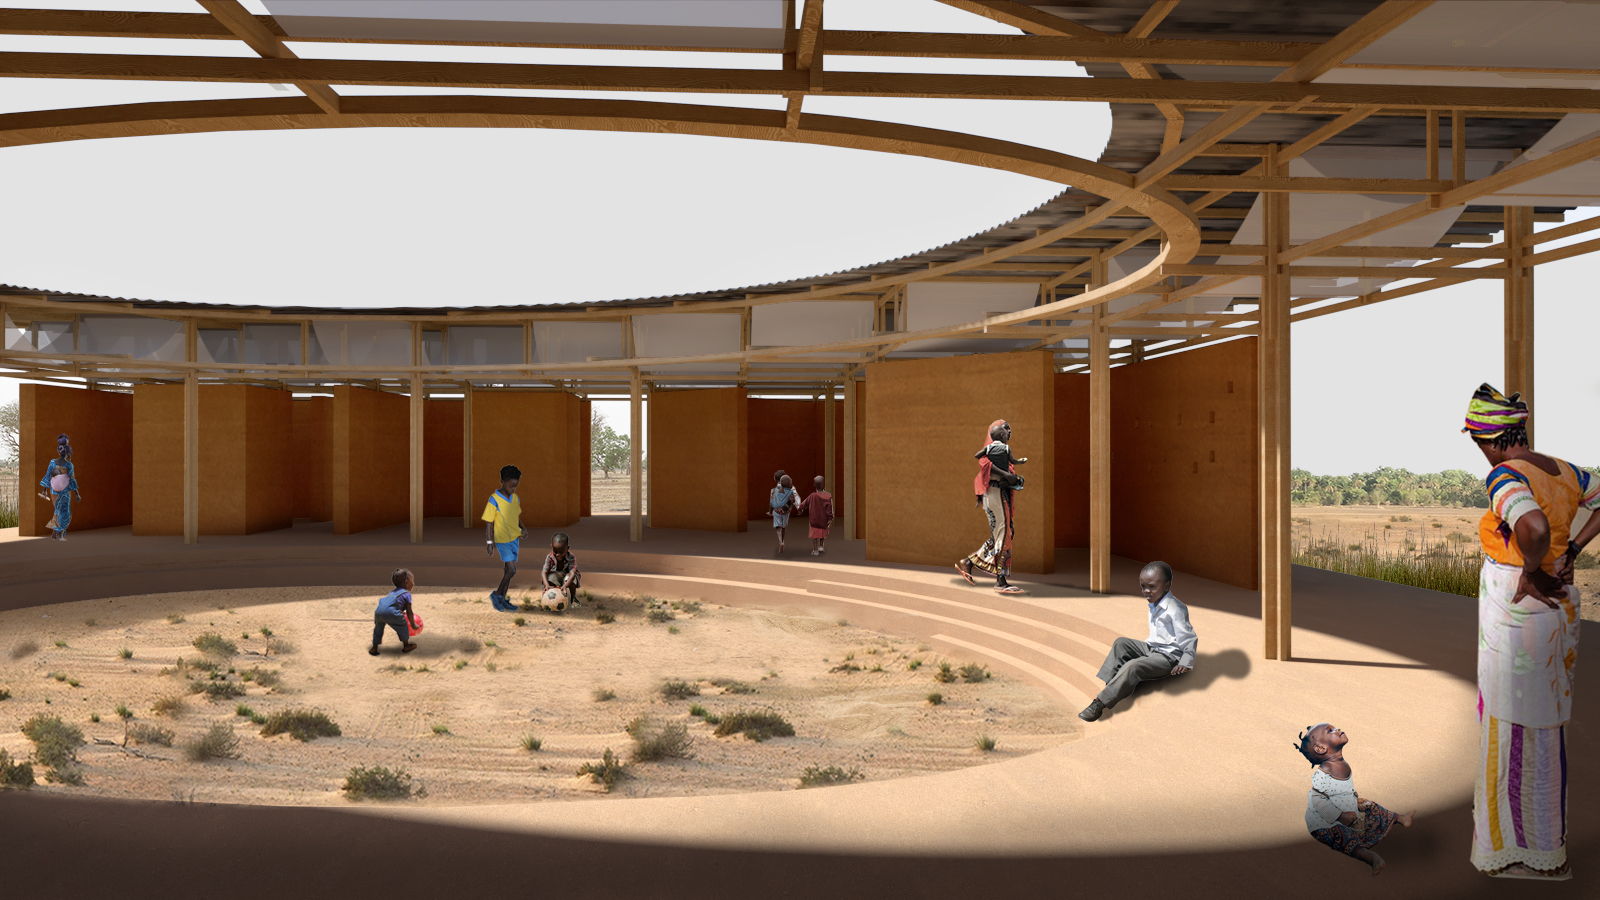 Archisearch 'Hide and seek': entry by Georgios Thalassinos & Ioanna Karampetsou at the Kaira Looro Architecture Competition 2022, Children’s House